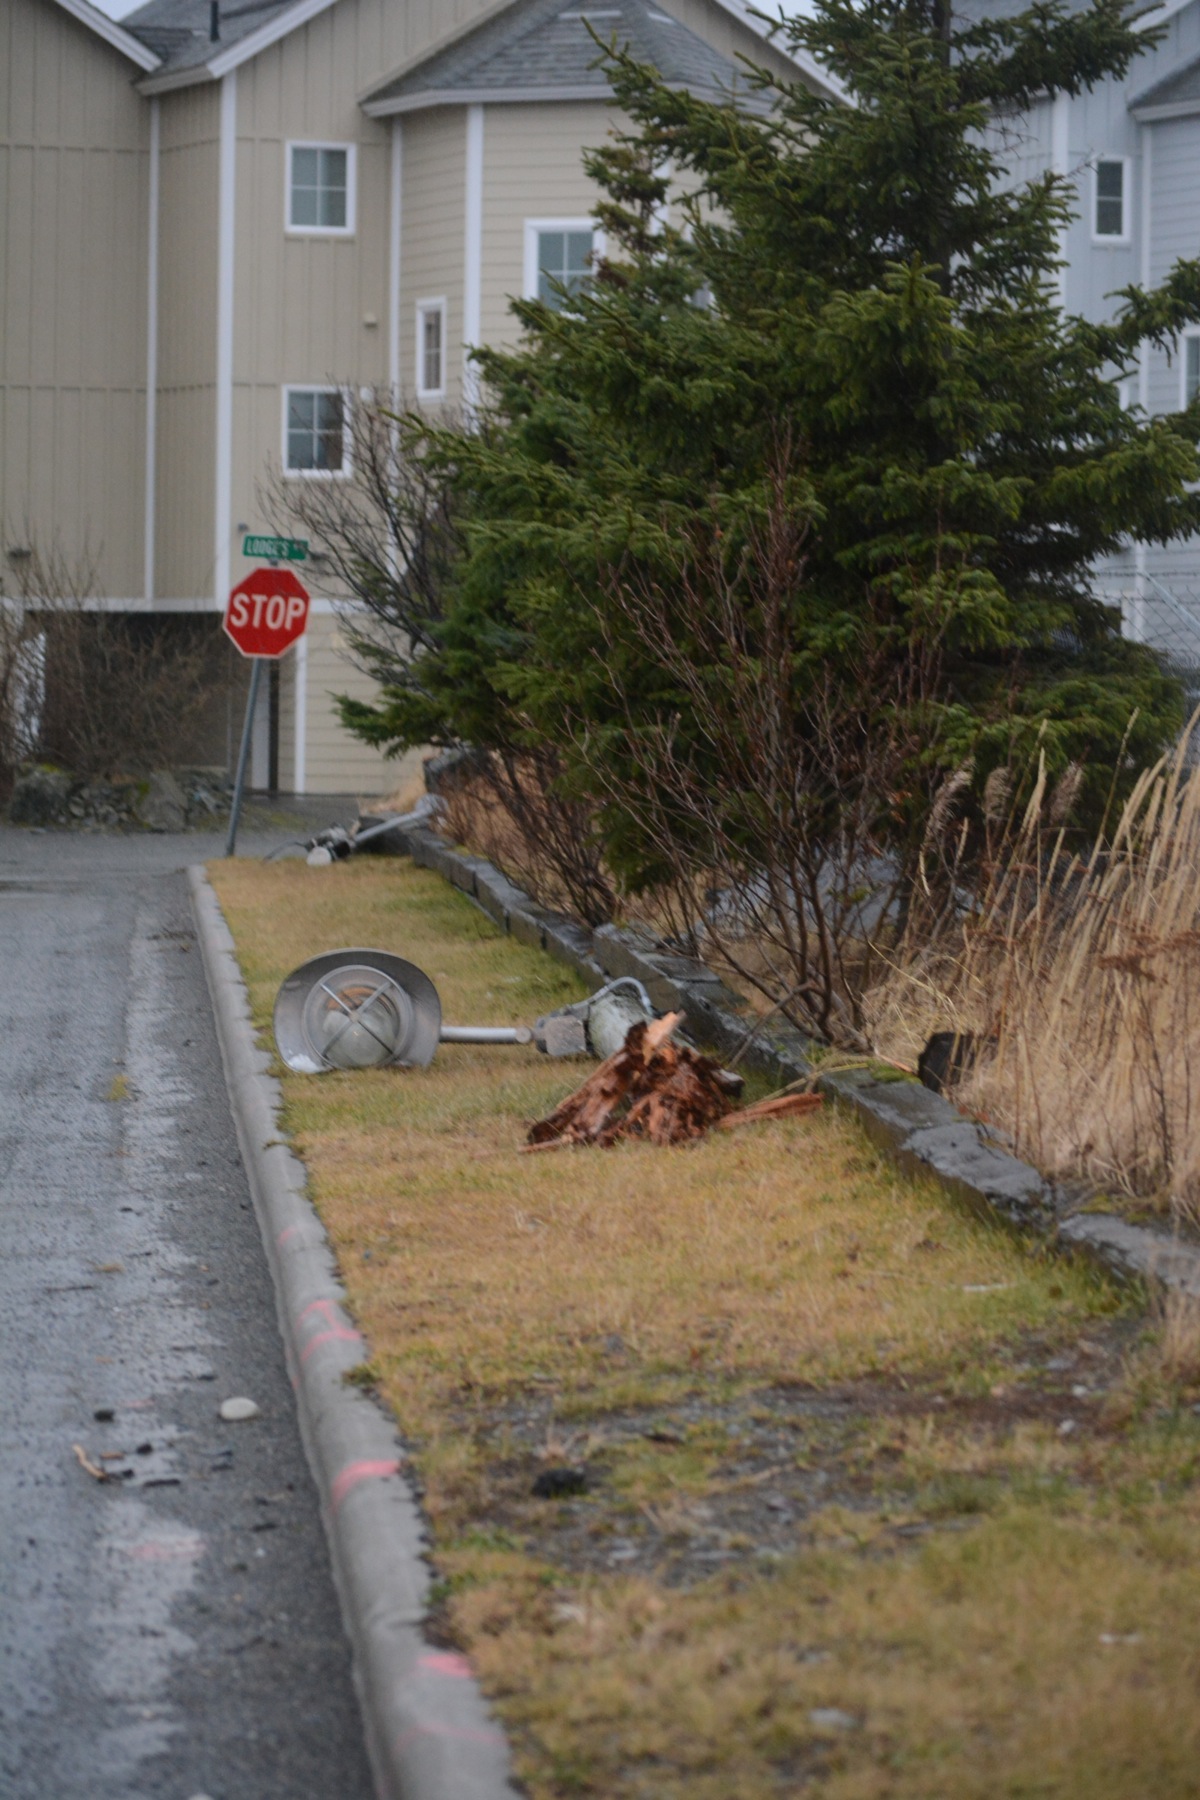 High winds last week knocked down lamp posts on the drive to the Land's End Lodgings condominiums on the Homer Spit.-Photo by Michael Armstrong, Homer News